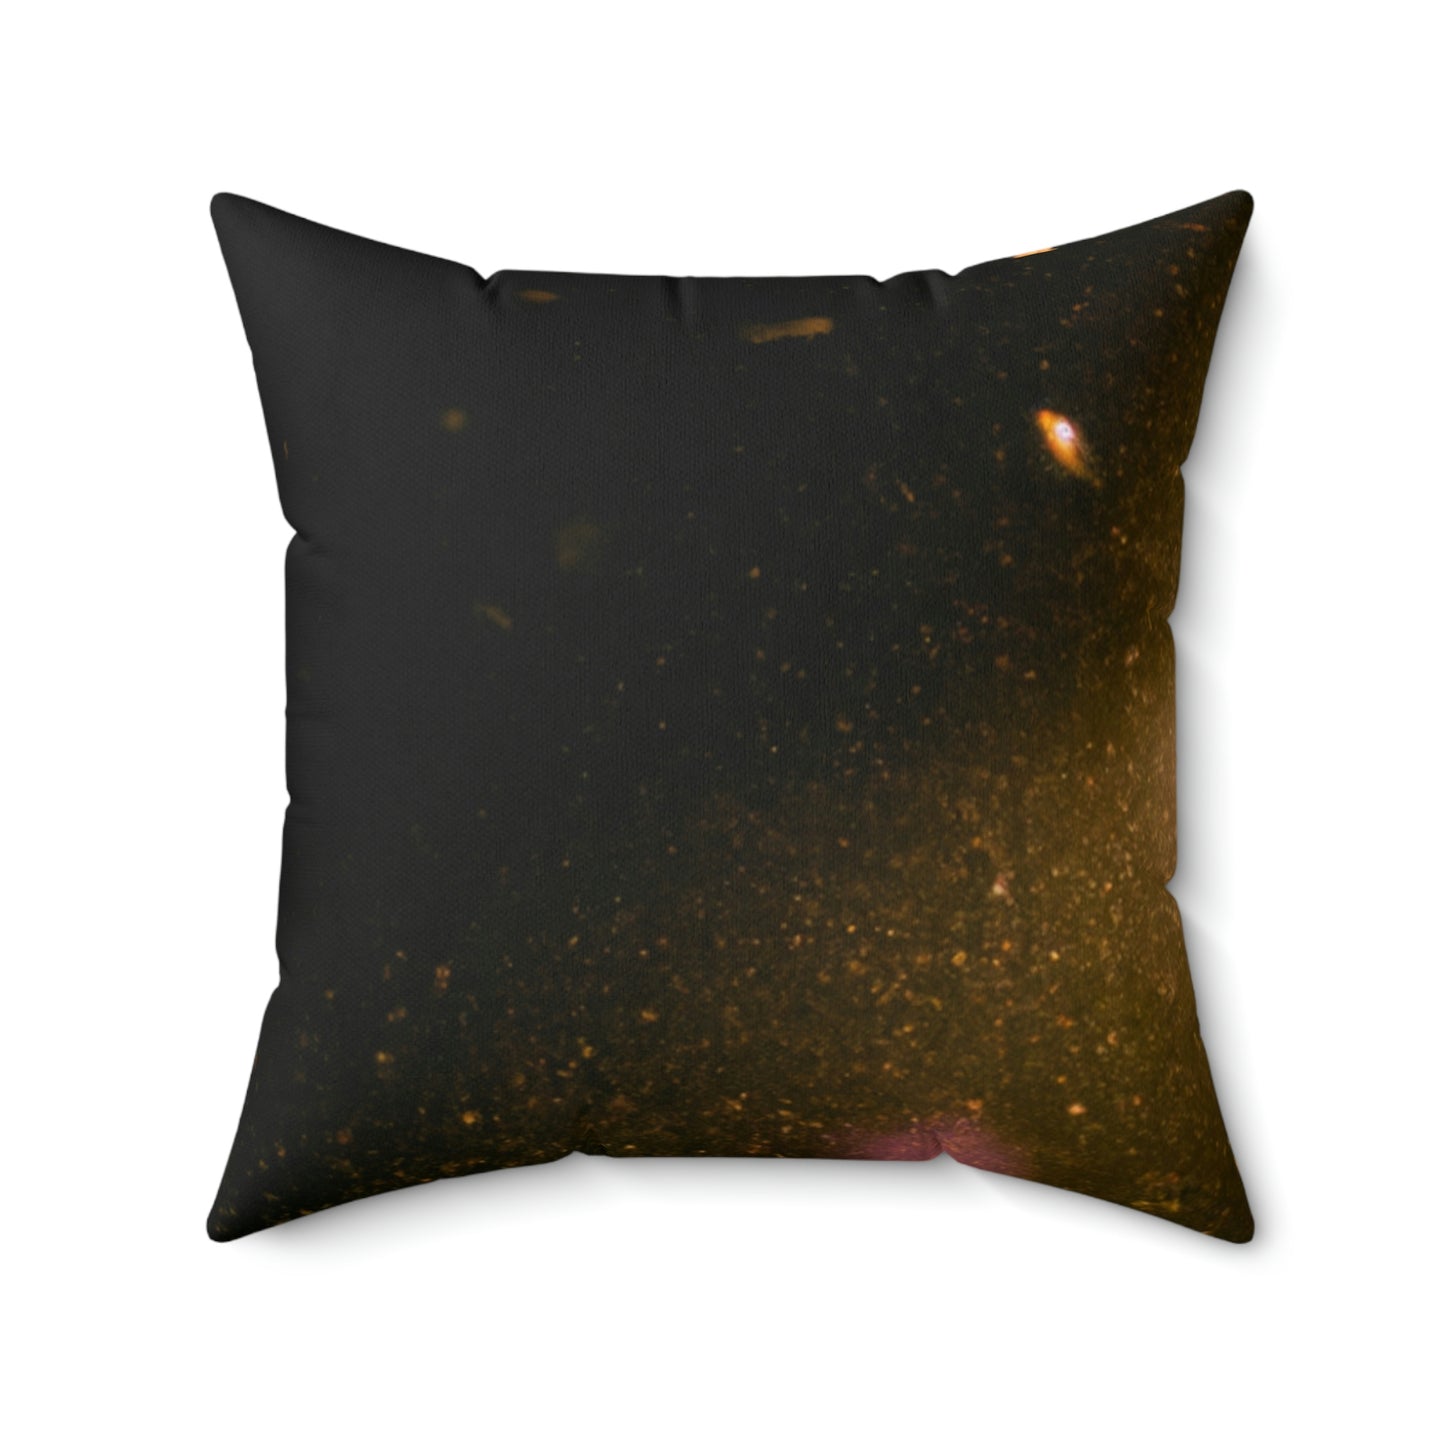 Winter's Lonely Lullaby - The Alien Square Pillow